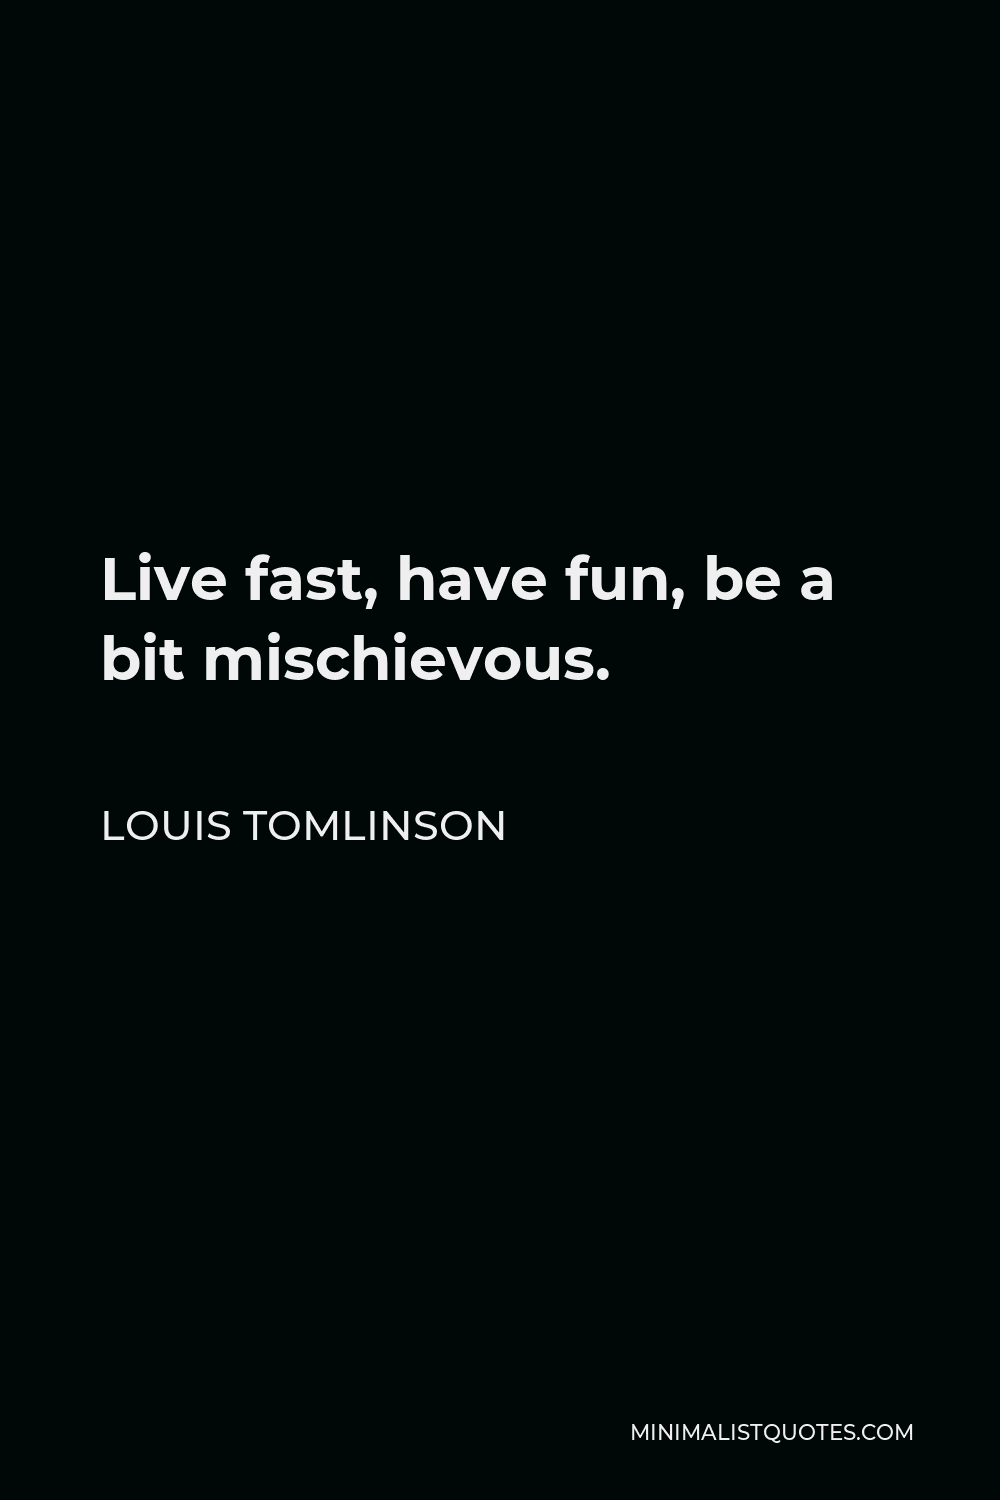 Louis Tomlinson Quote - Live fast, have fun, be a bit mischievous.